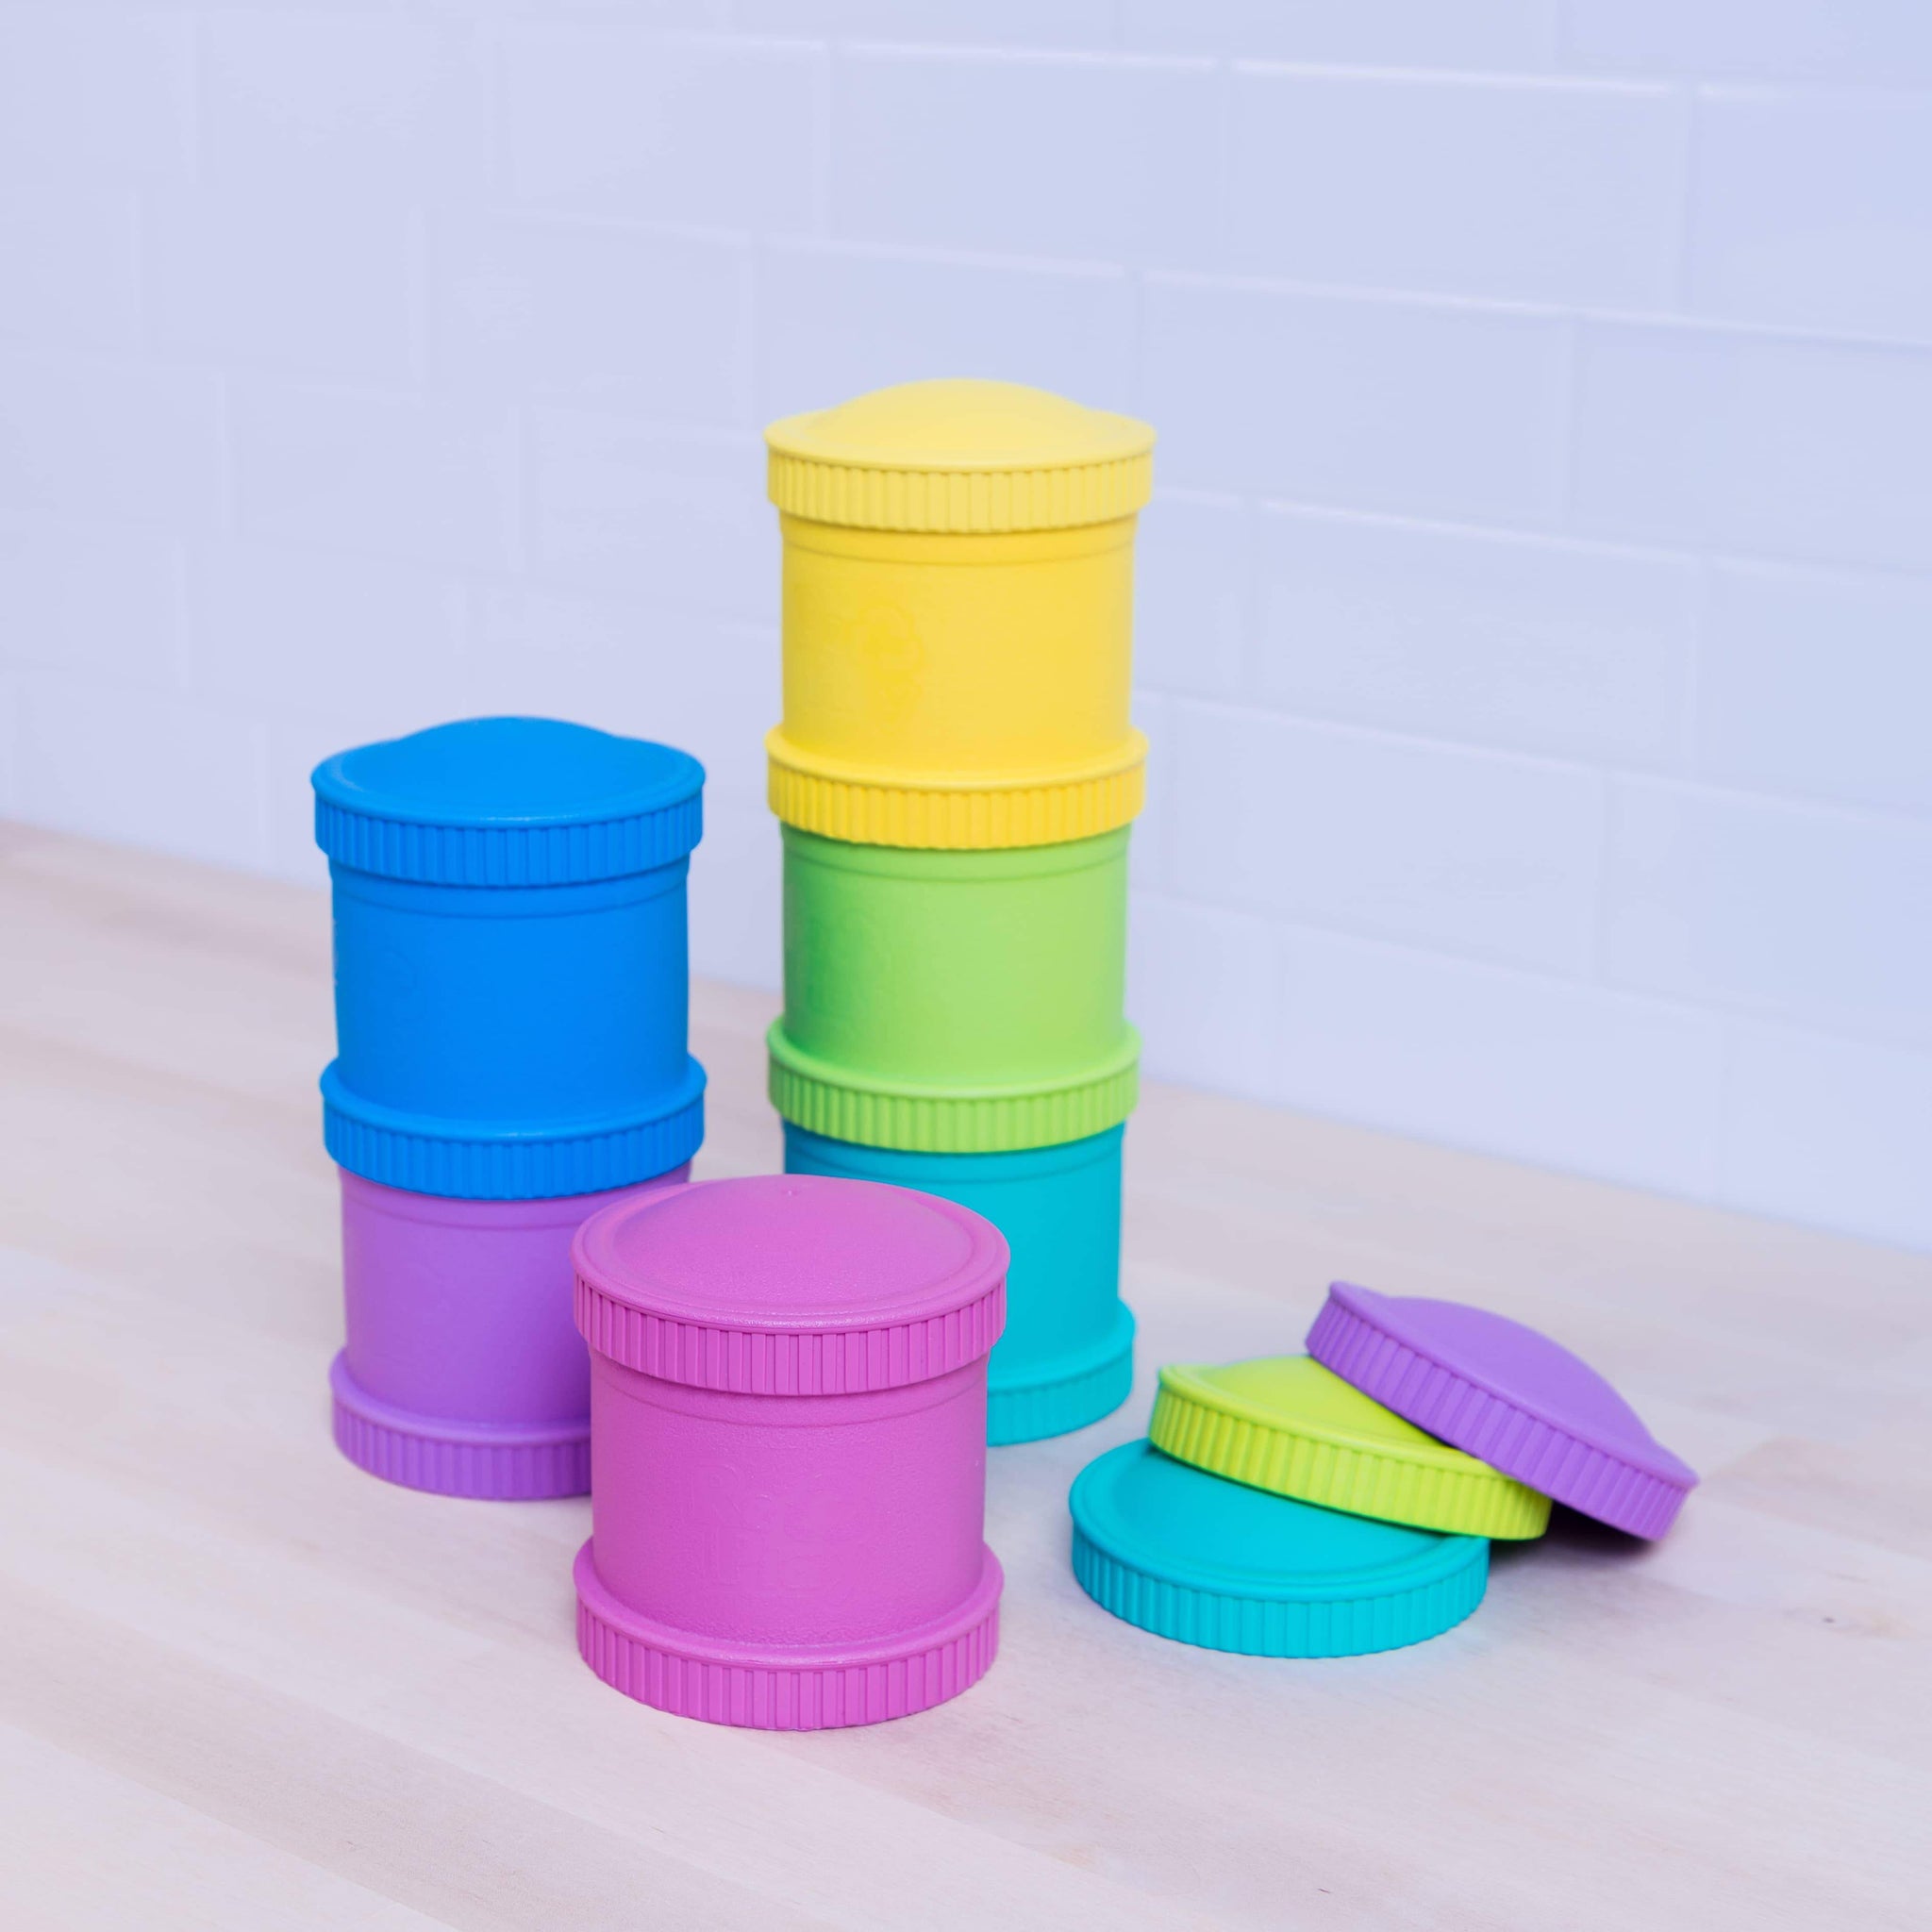 Re-Play Toddler Tableware - Snack Pods - Crunch Natural Parenting is where to buy